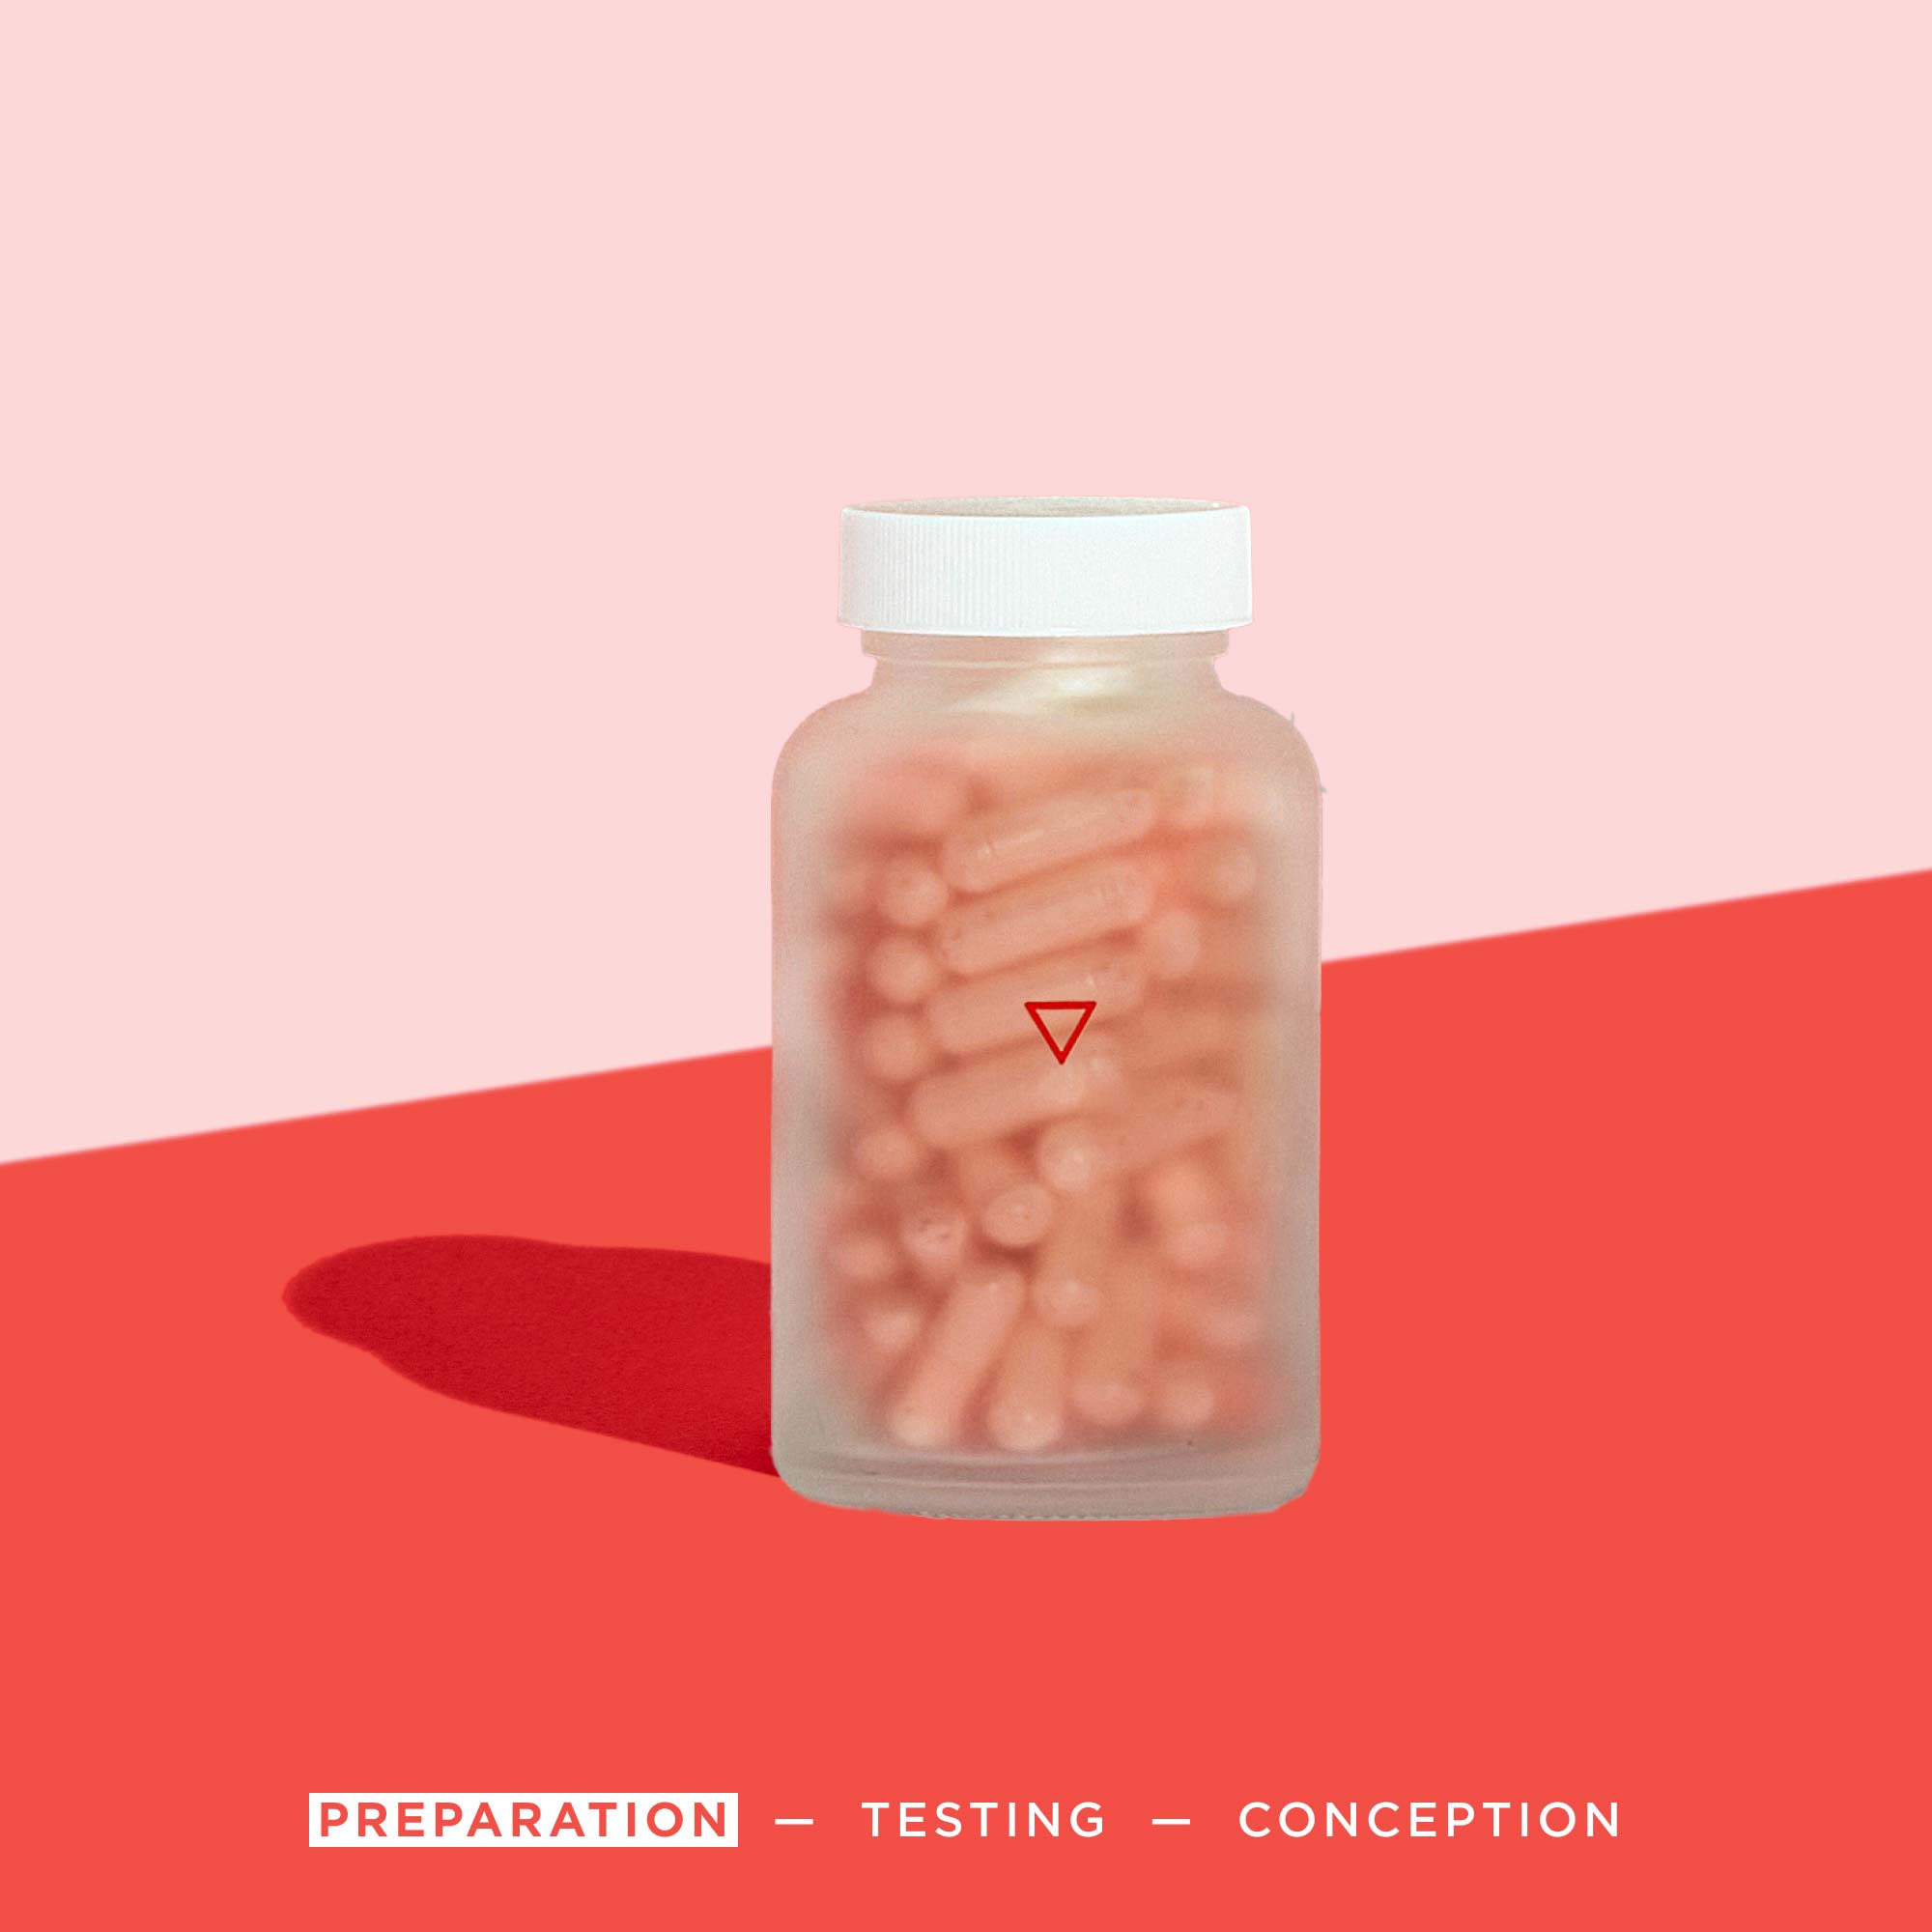 Wisp prenatal vitamins on a red surface with a pink background